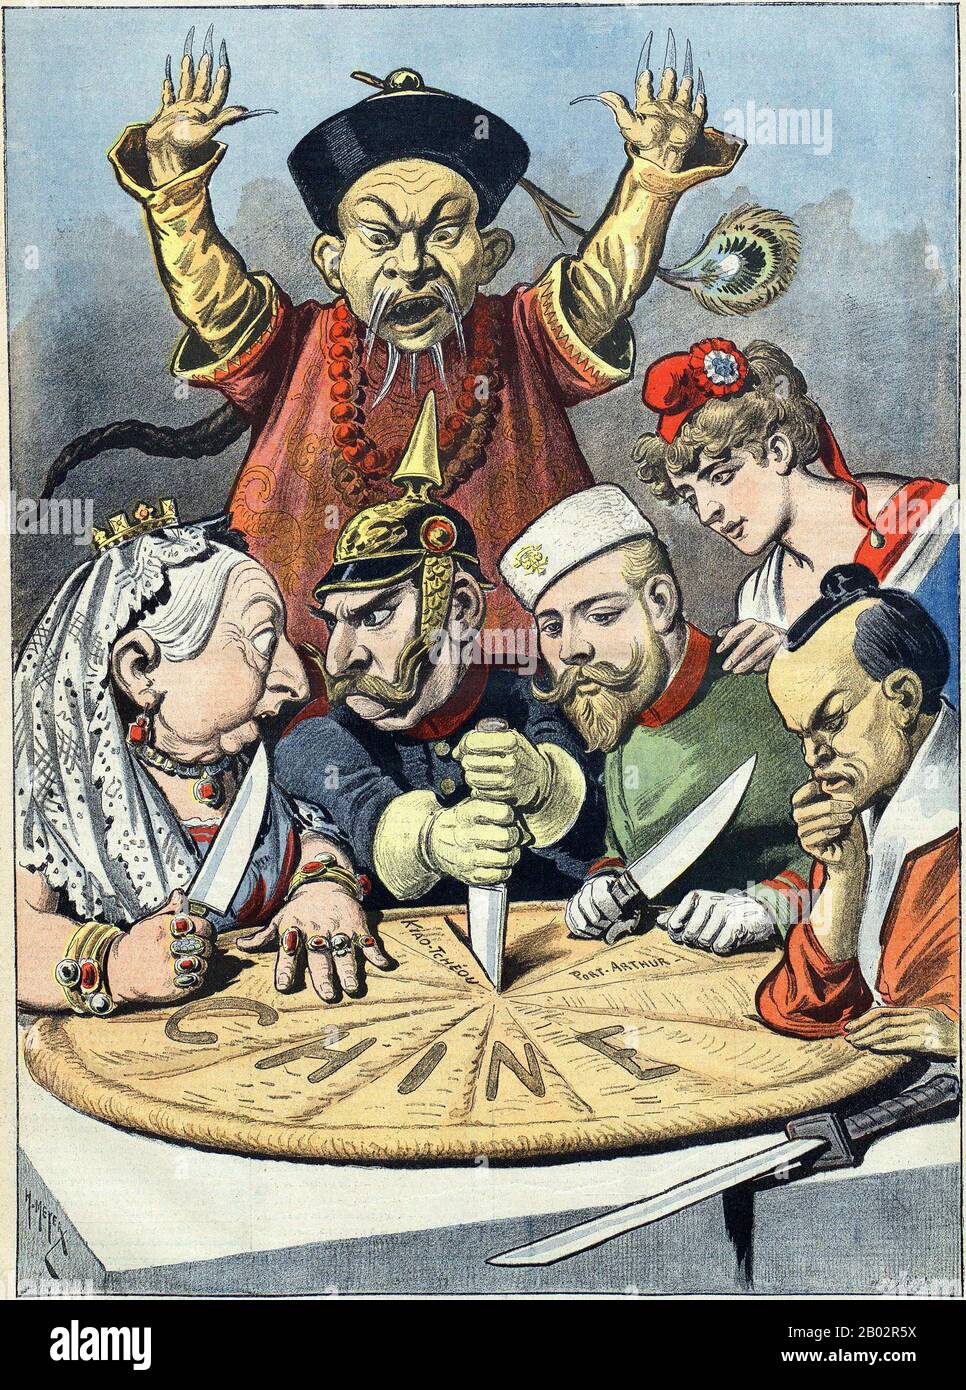 In this French political cartoon from 1898 a pastry representing China is being divided between caricatures of Queen Victoria of the United Kingdom and William II of Germany (who is squabbling with Queen Victoria over a borderland piece, whilst thrusting a knife into the pie to signify aggressive German intentions).  Also present are Nicholas II of Russia, who is eyeing a particular piece, the French Marianne (who is diplomatically shown as not participating in the carving, and is depicted as close to Nicholas II, as a reminder of the Franco-Russian Alliance), and a samurai representing Japan, Stock Photo